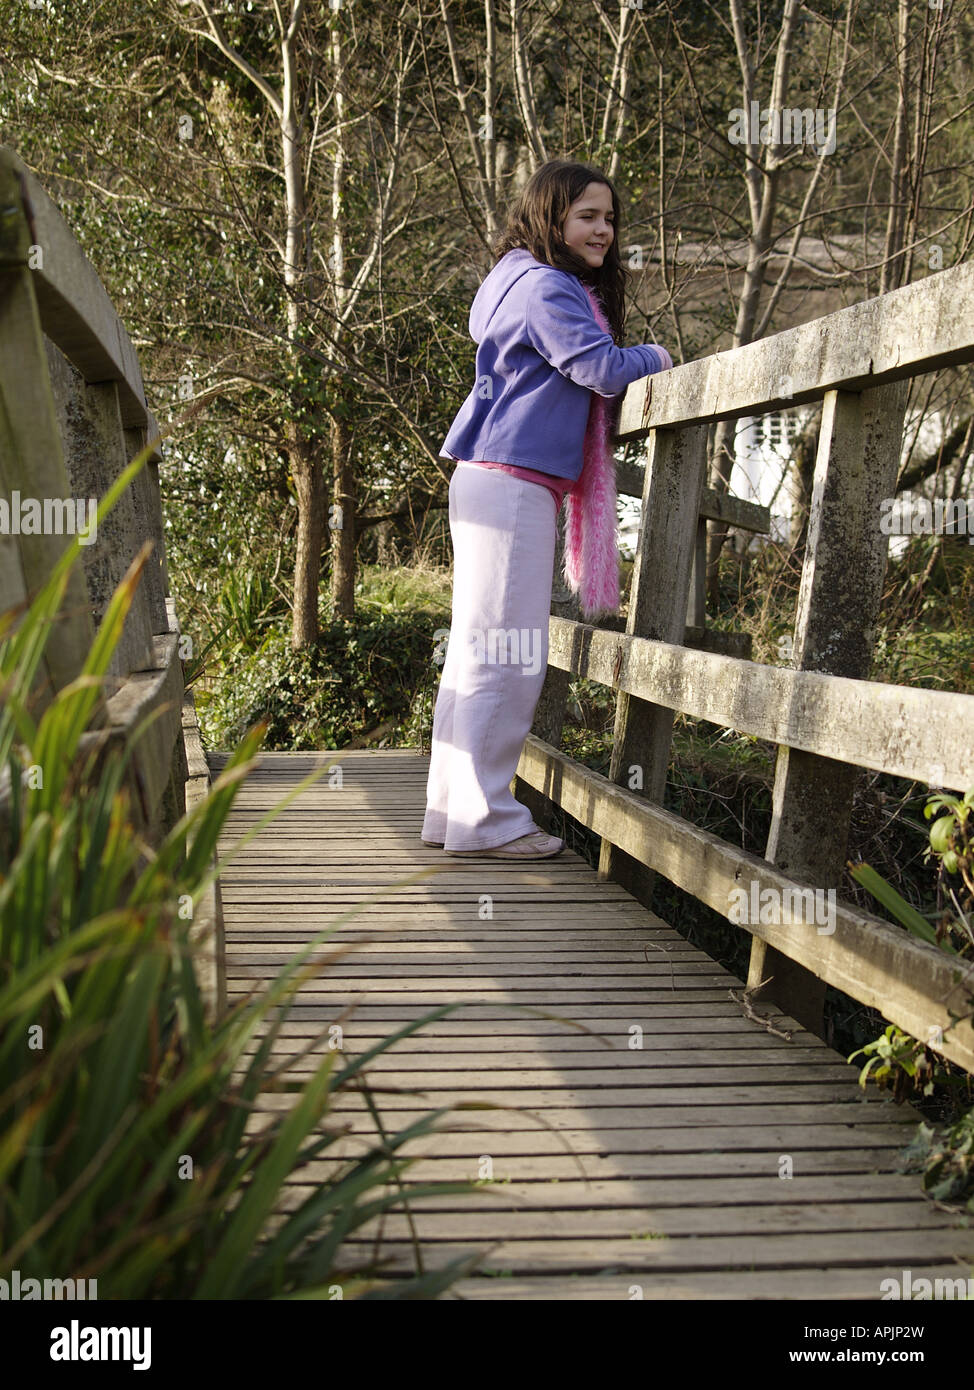 Young girl on wooden foot bridge laughing Stock Photo